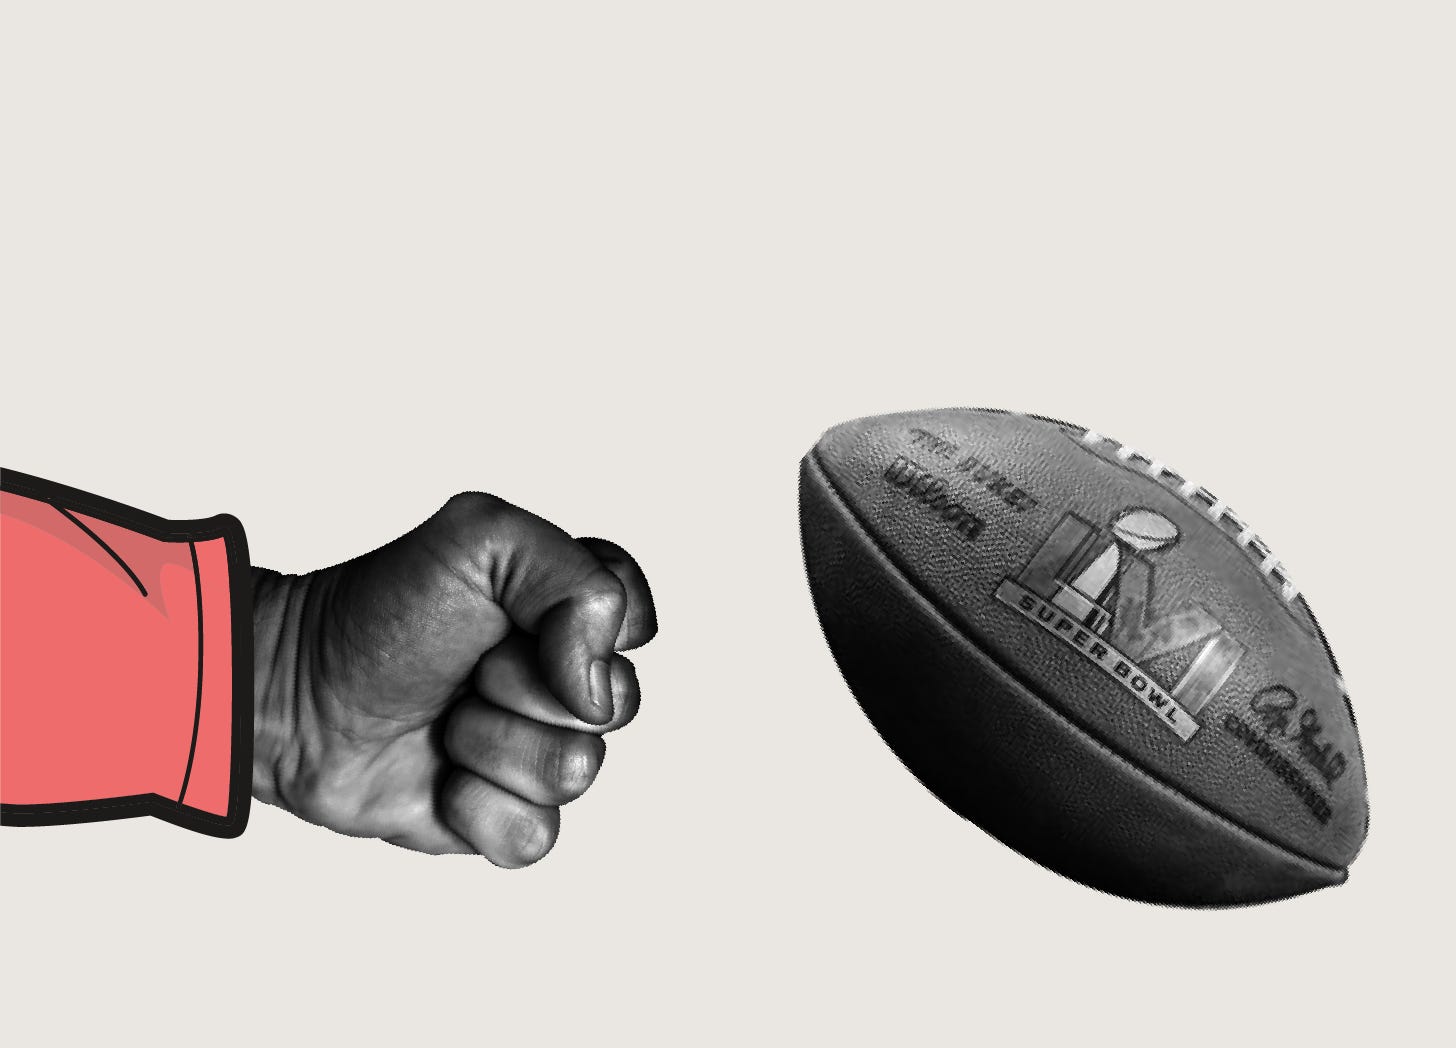 Image of fist punching a football